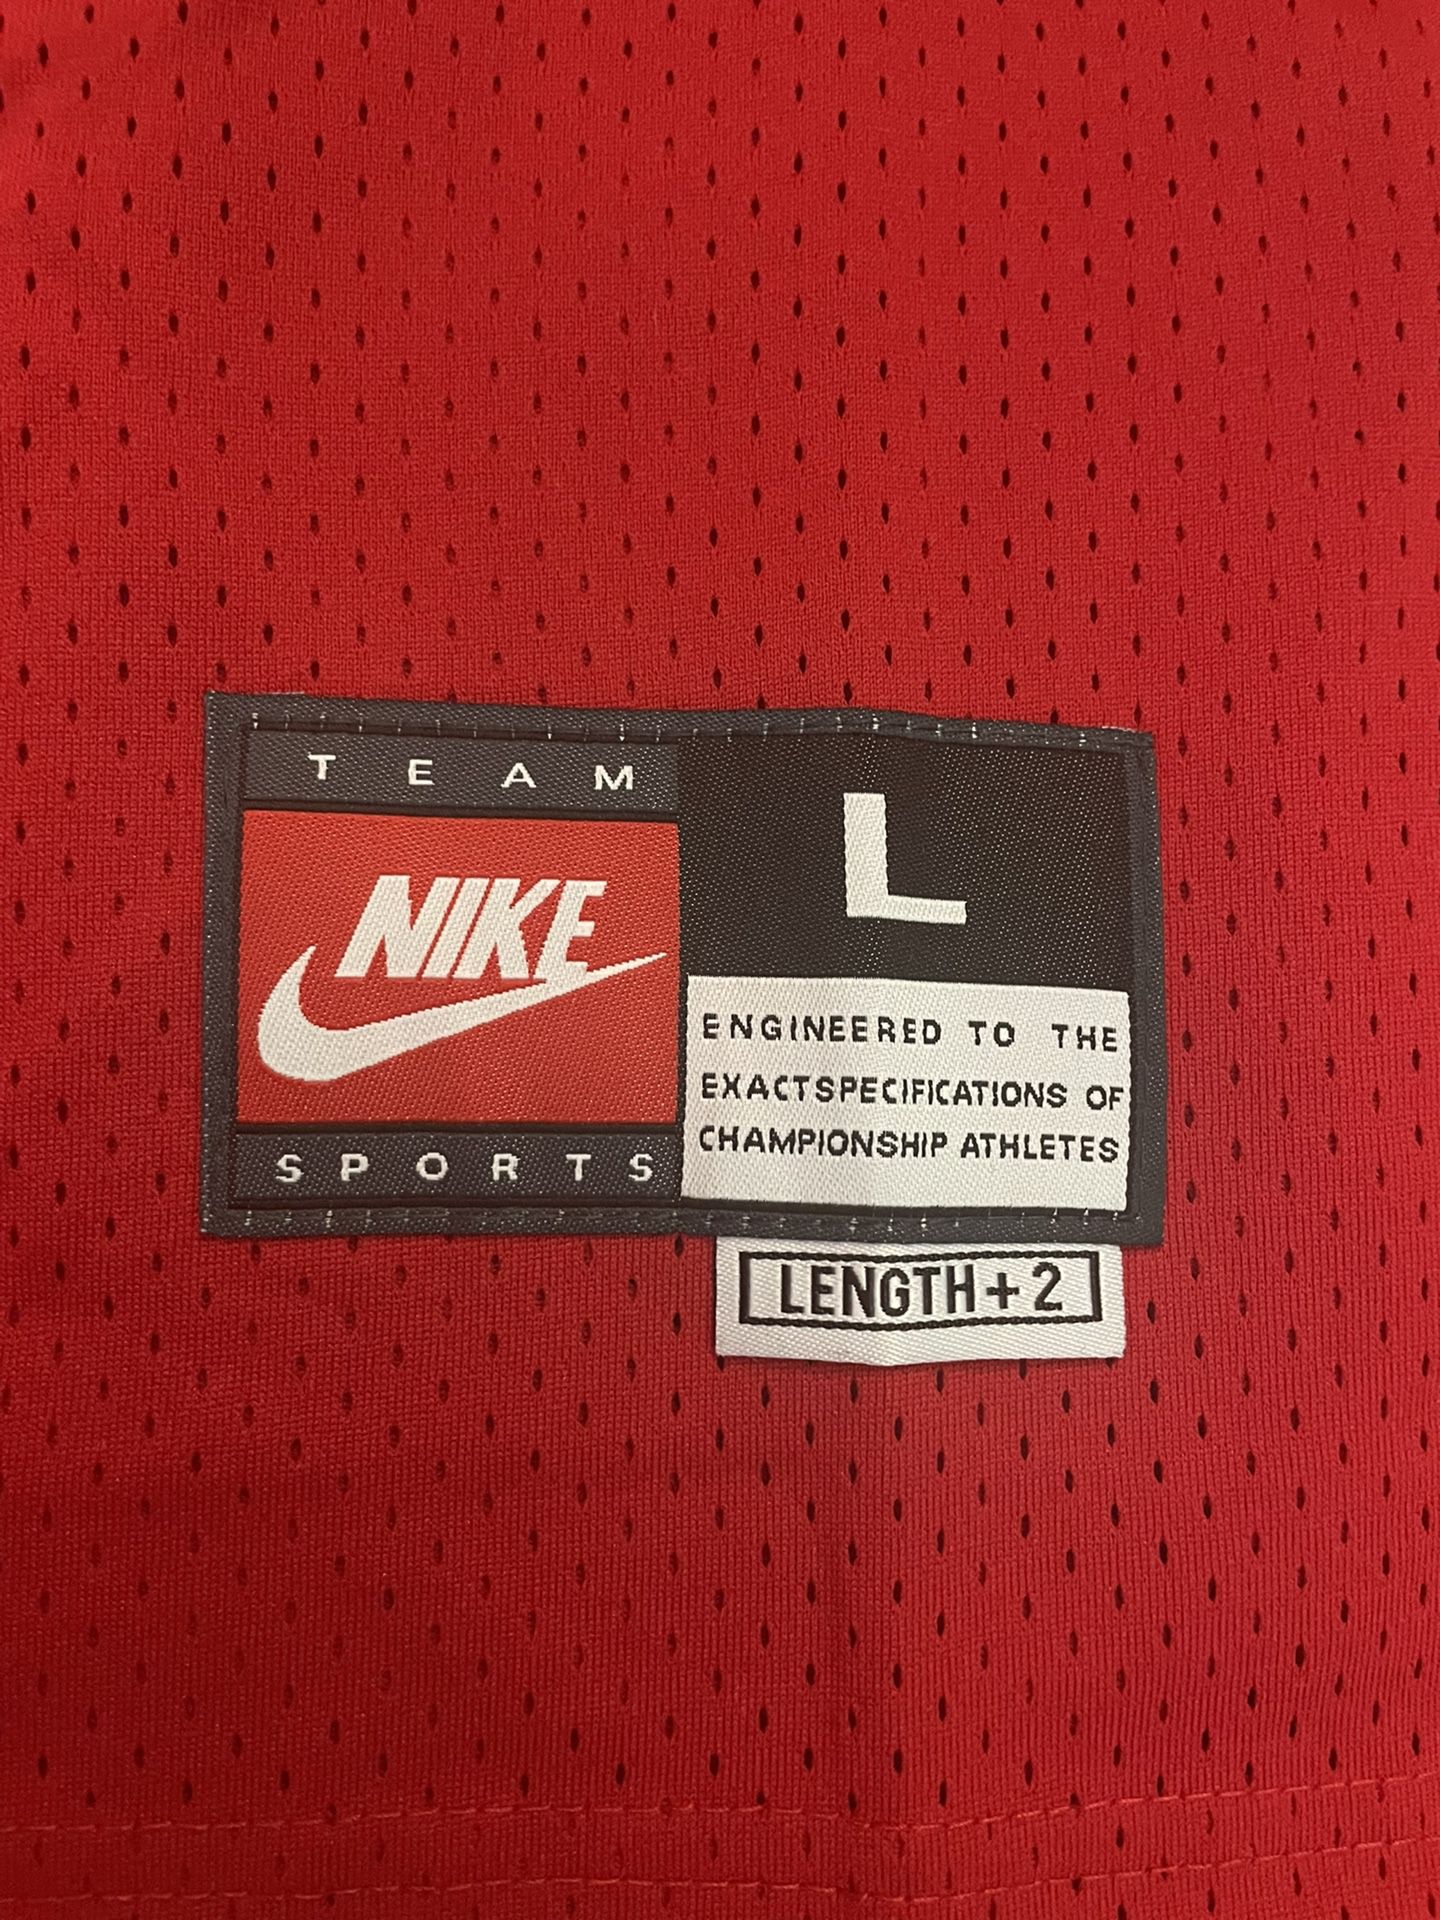 NBA Mitchell & Ness Chicago Bulls Michael Jordan Jersey for Sale in  Irwindale, CA - OfferUp